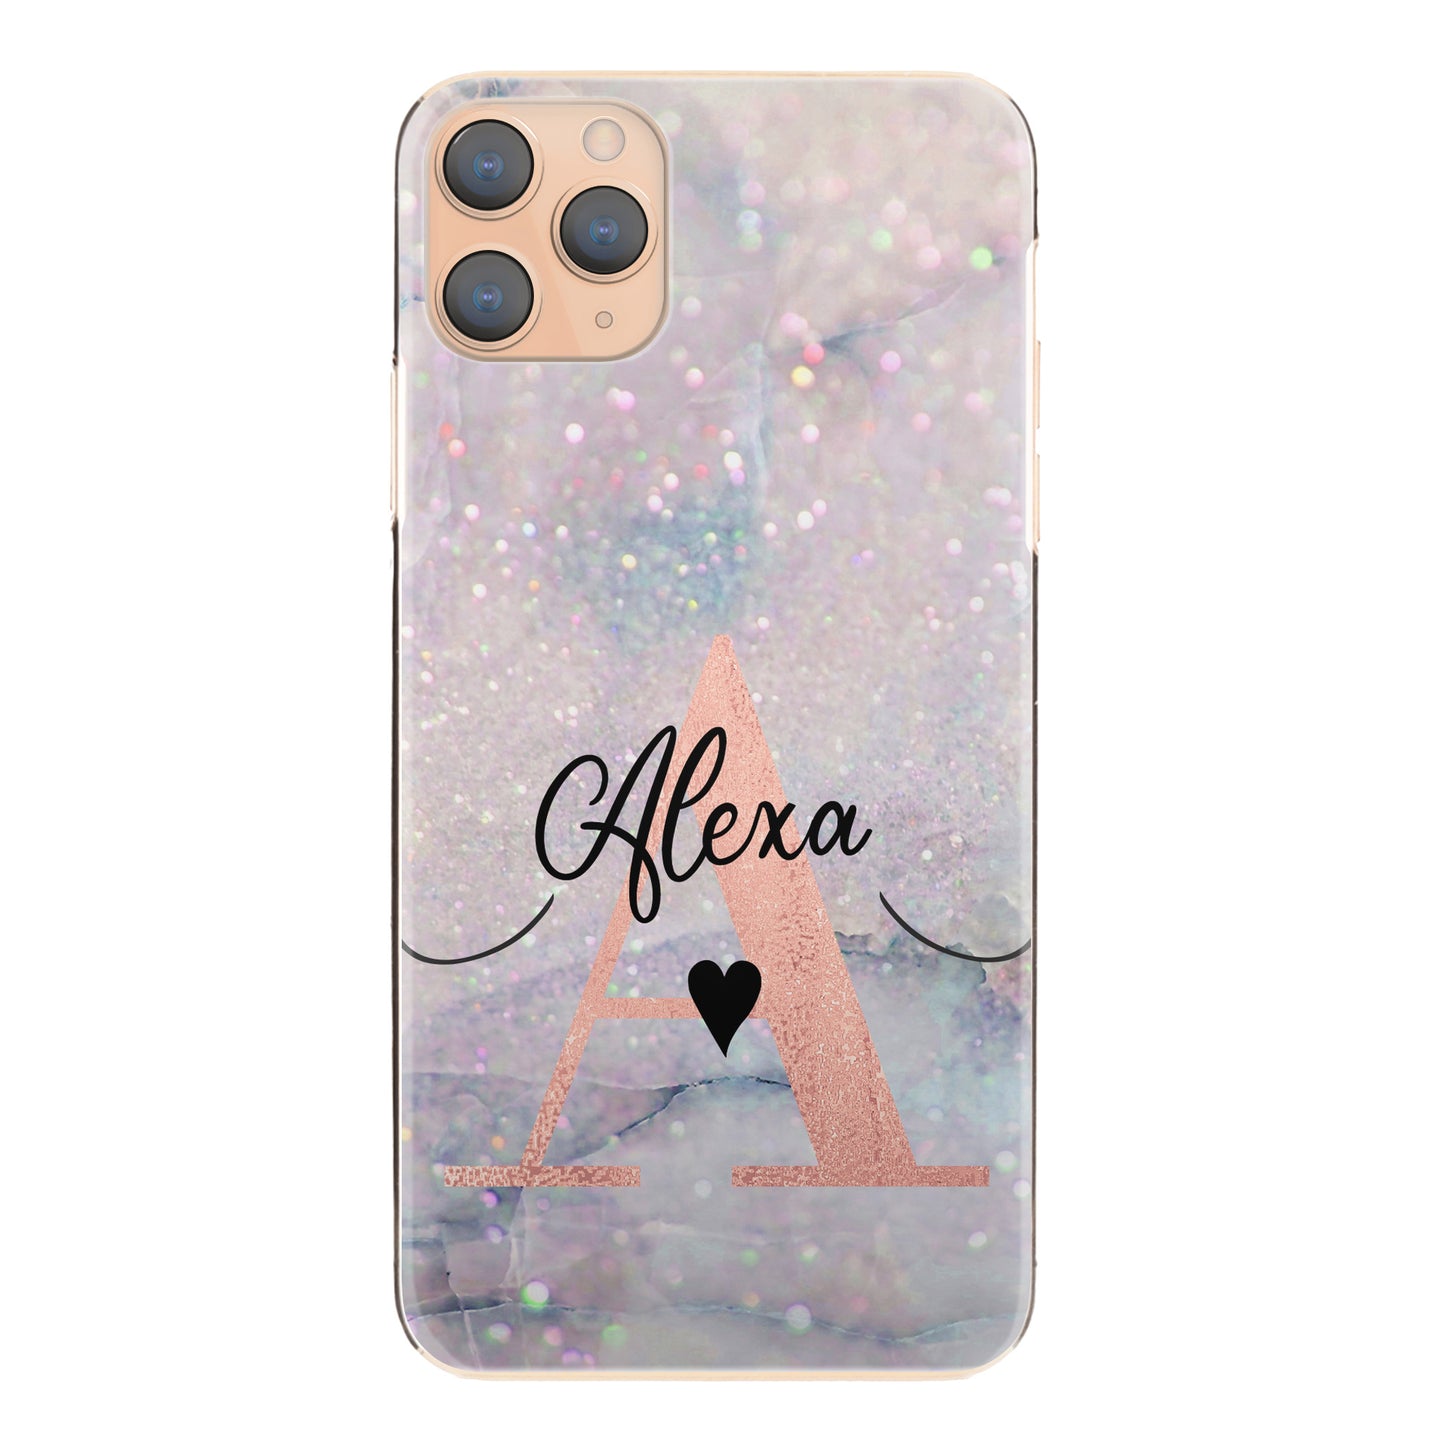 Personalised Motorola Phone Hard Case with Stylish Heart Text and Pink Initial on Textured Glitter Effect